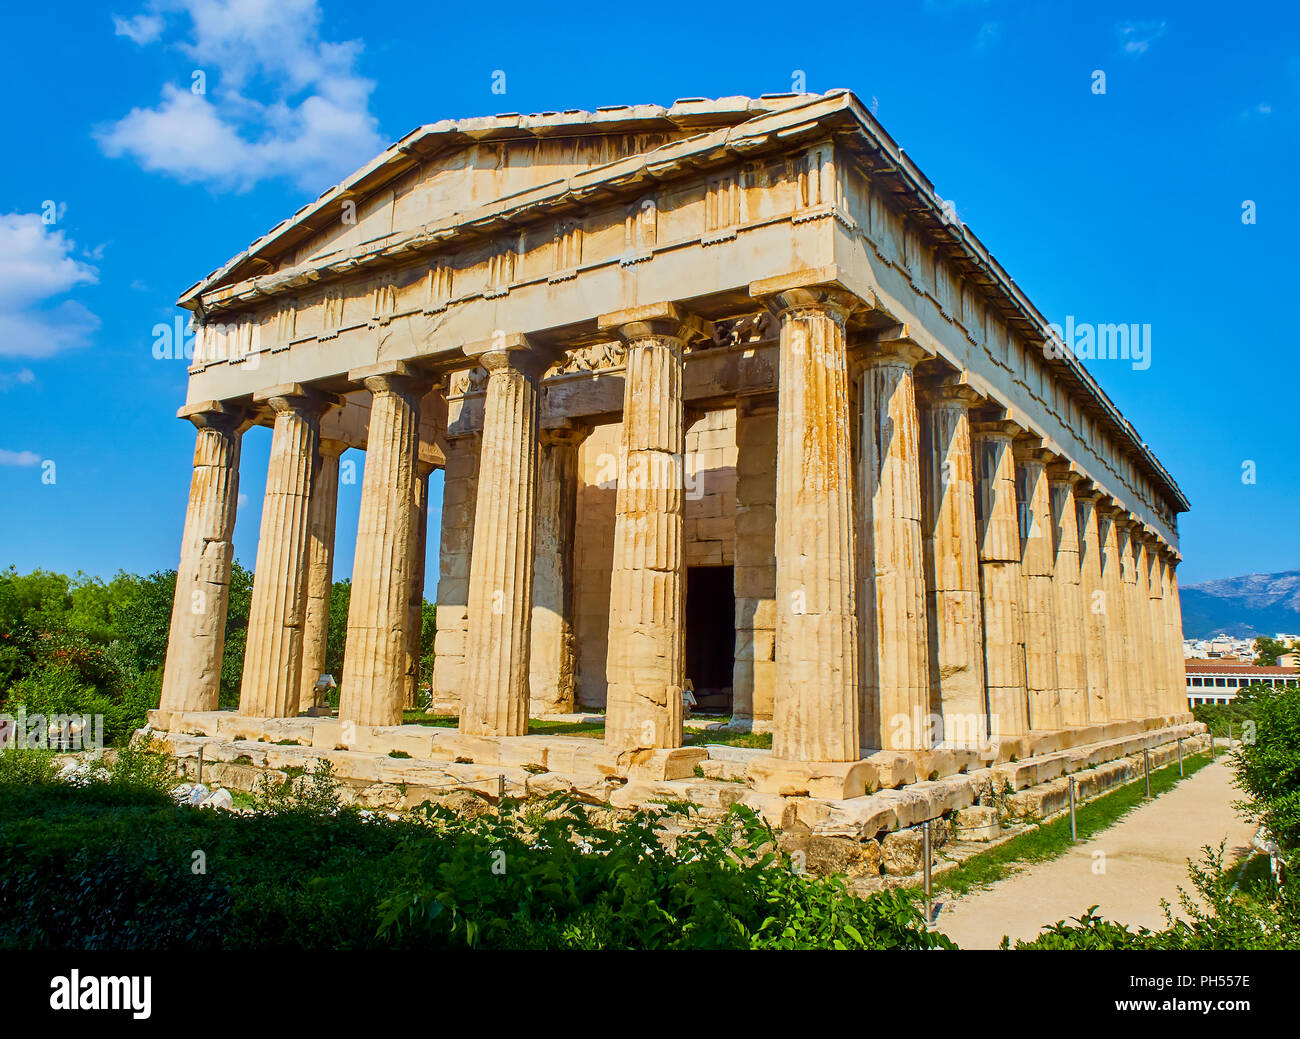 Temple of Hephaestus. Ancient Greek place of worship located at the